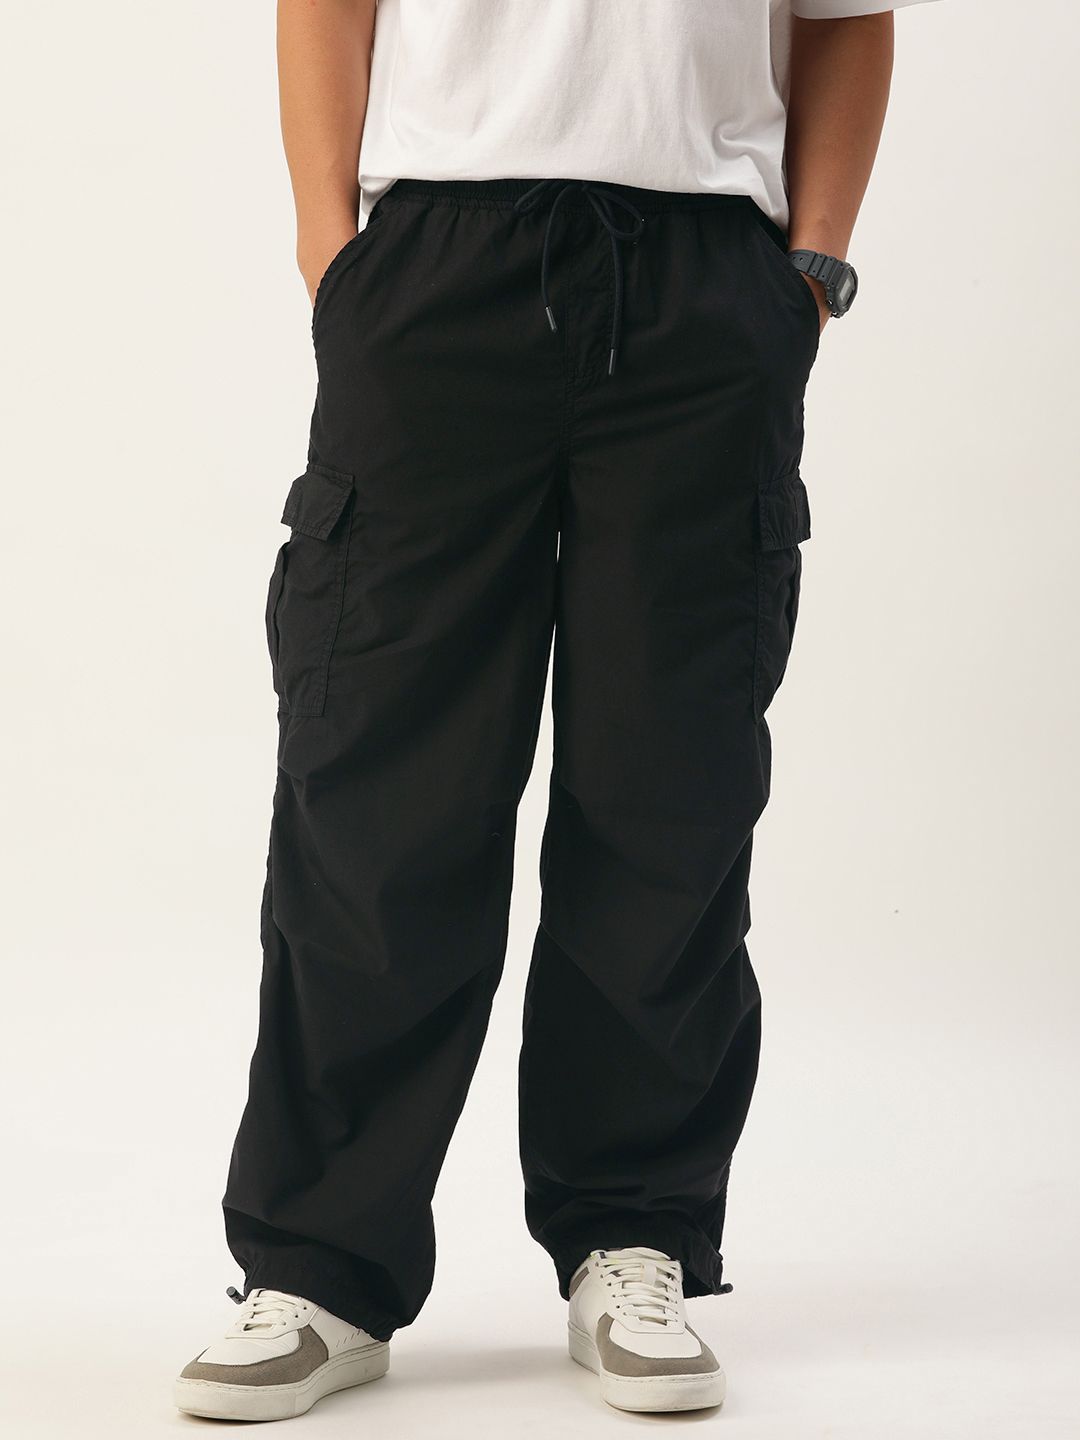 Bene Kleed Unisex Black Parachute Fit Pure Cotton Cargos Trousers Price in India